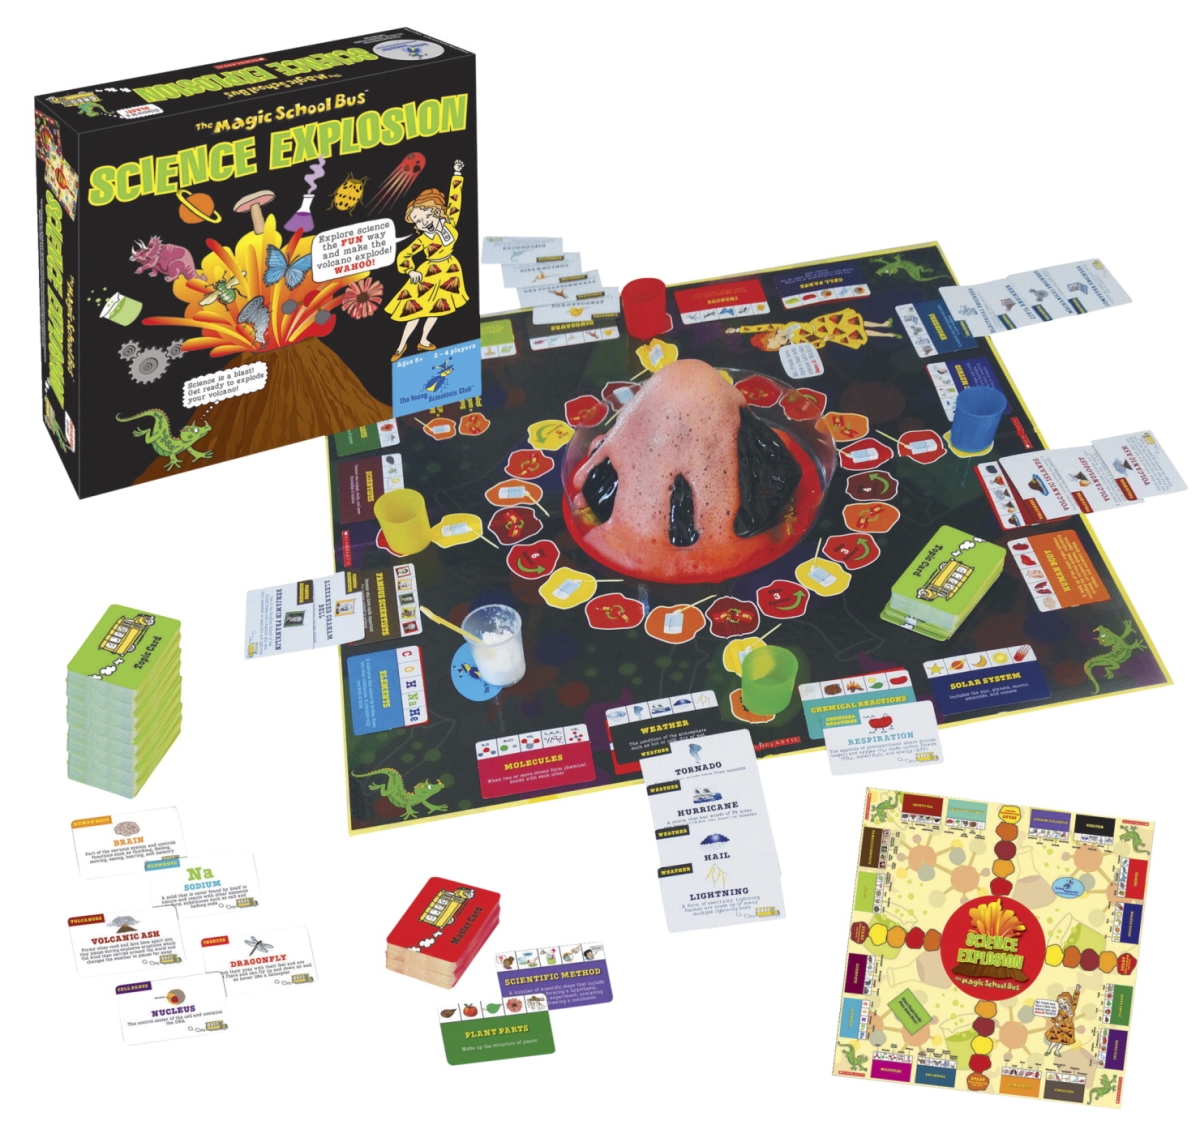 Young Scientists Club 1514819 The Magic School Bus Science Explosion Game